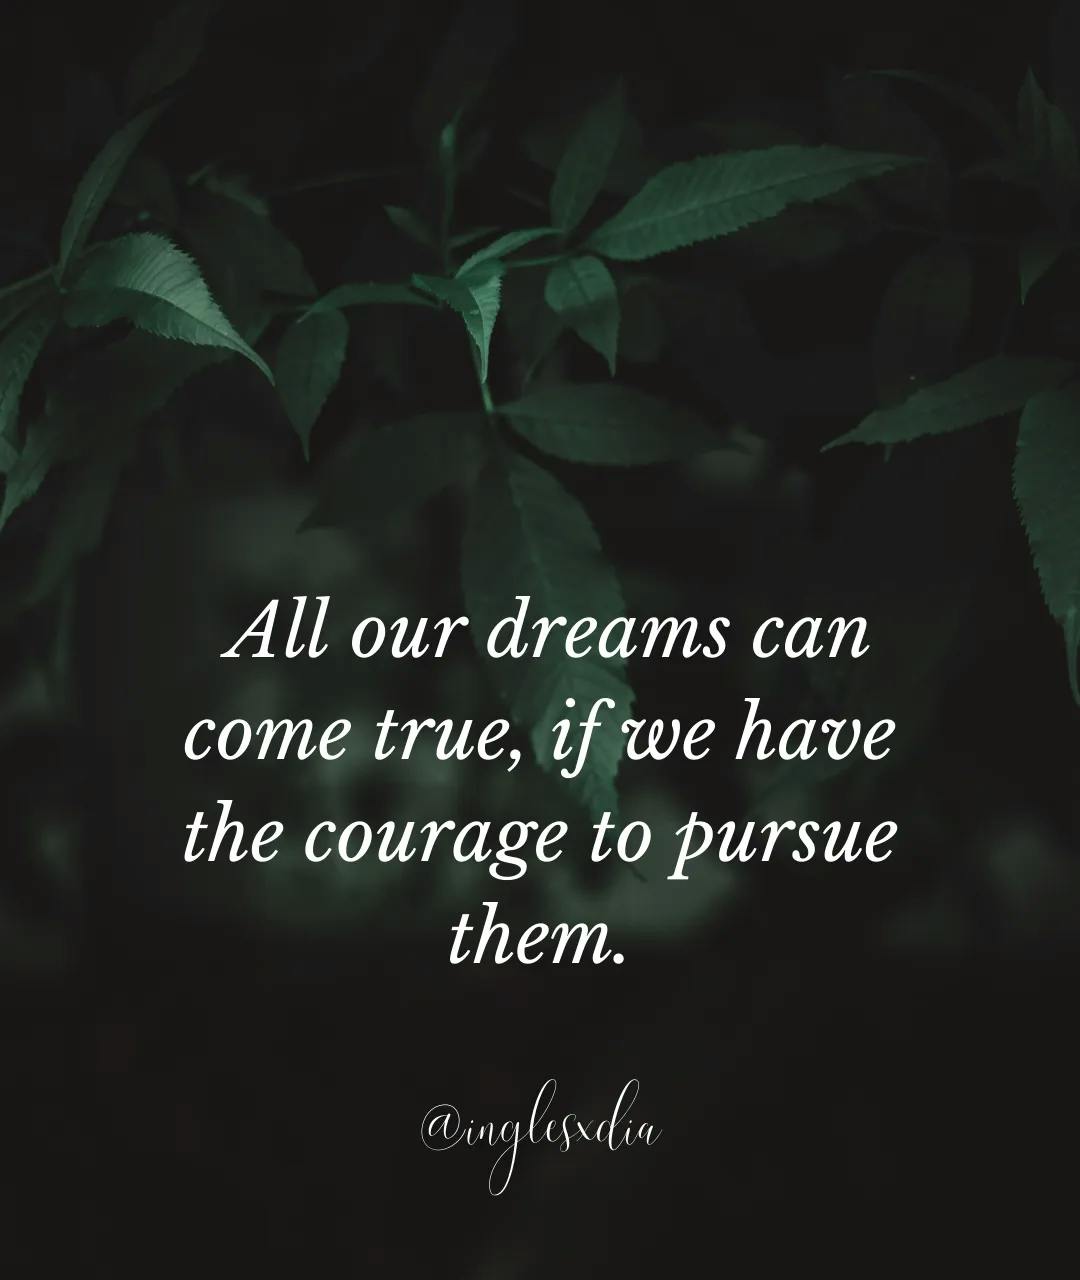 All our dreams...